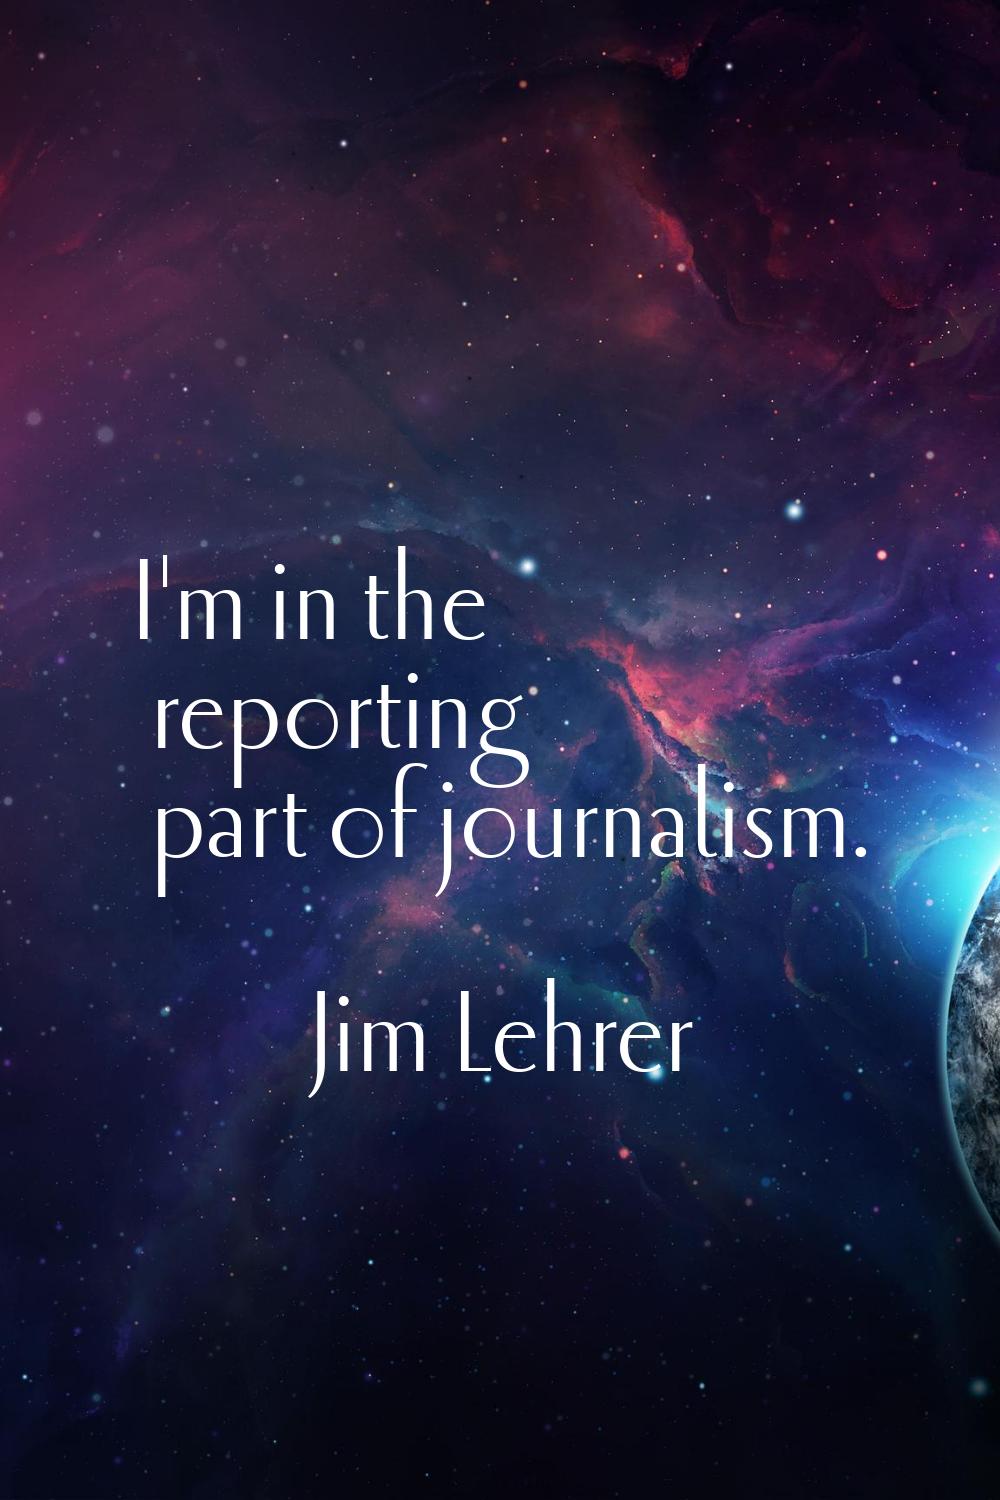 I'm in the reporting part of journalism.